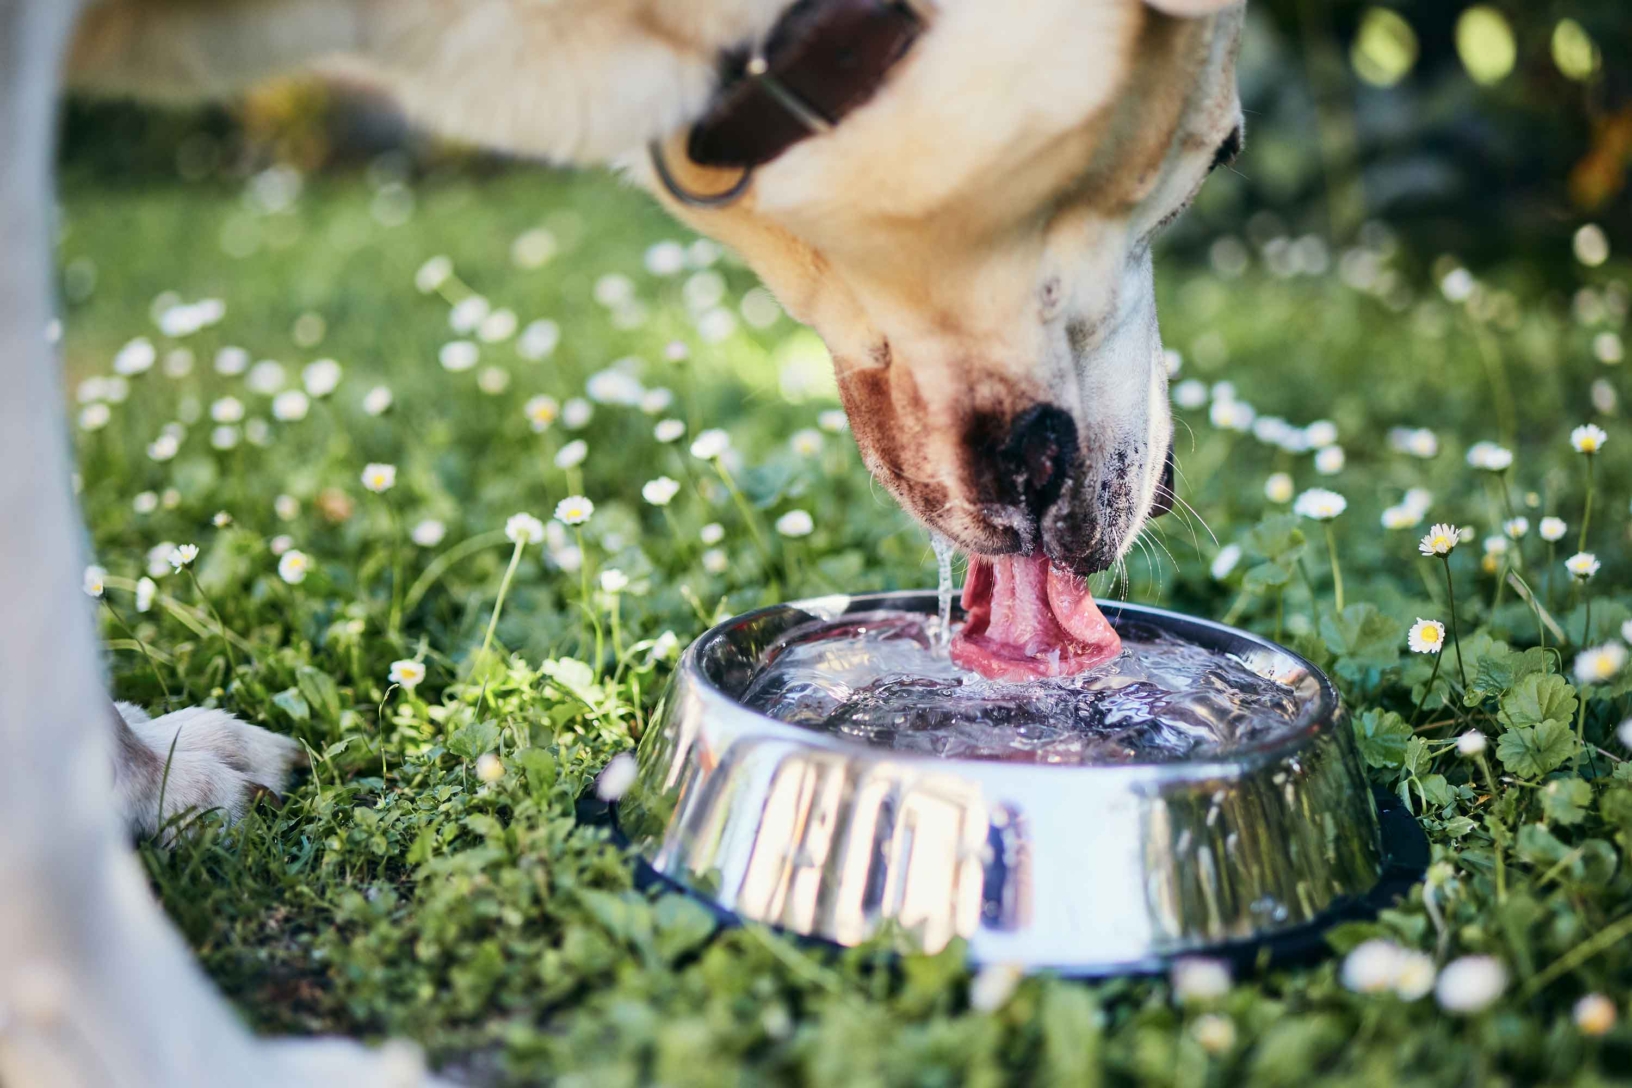 A dog drinking from a metal bowl